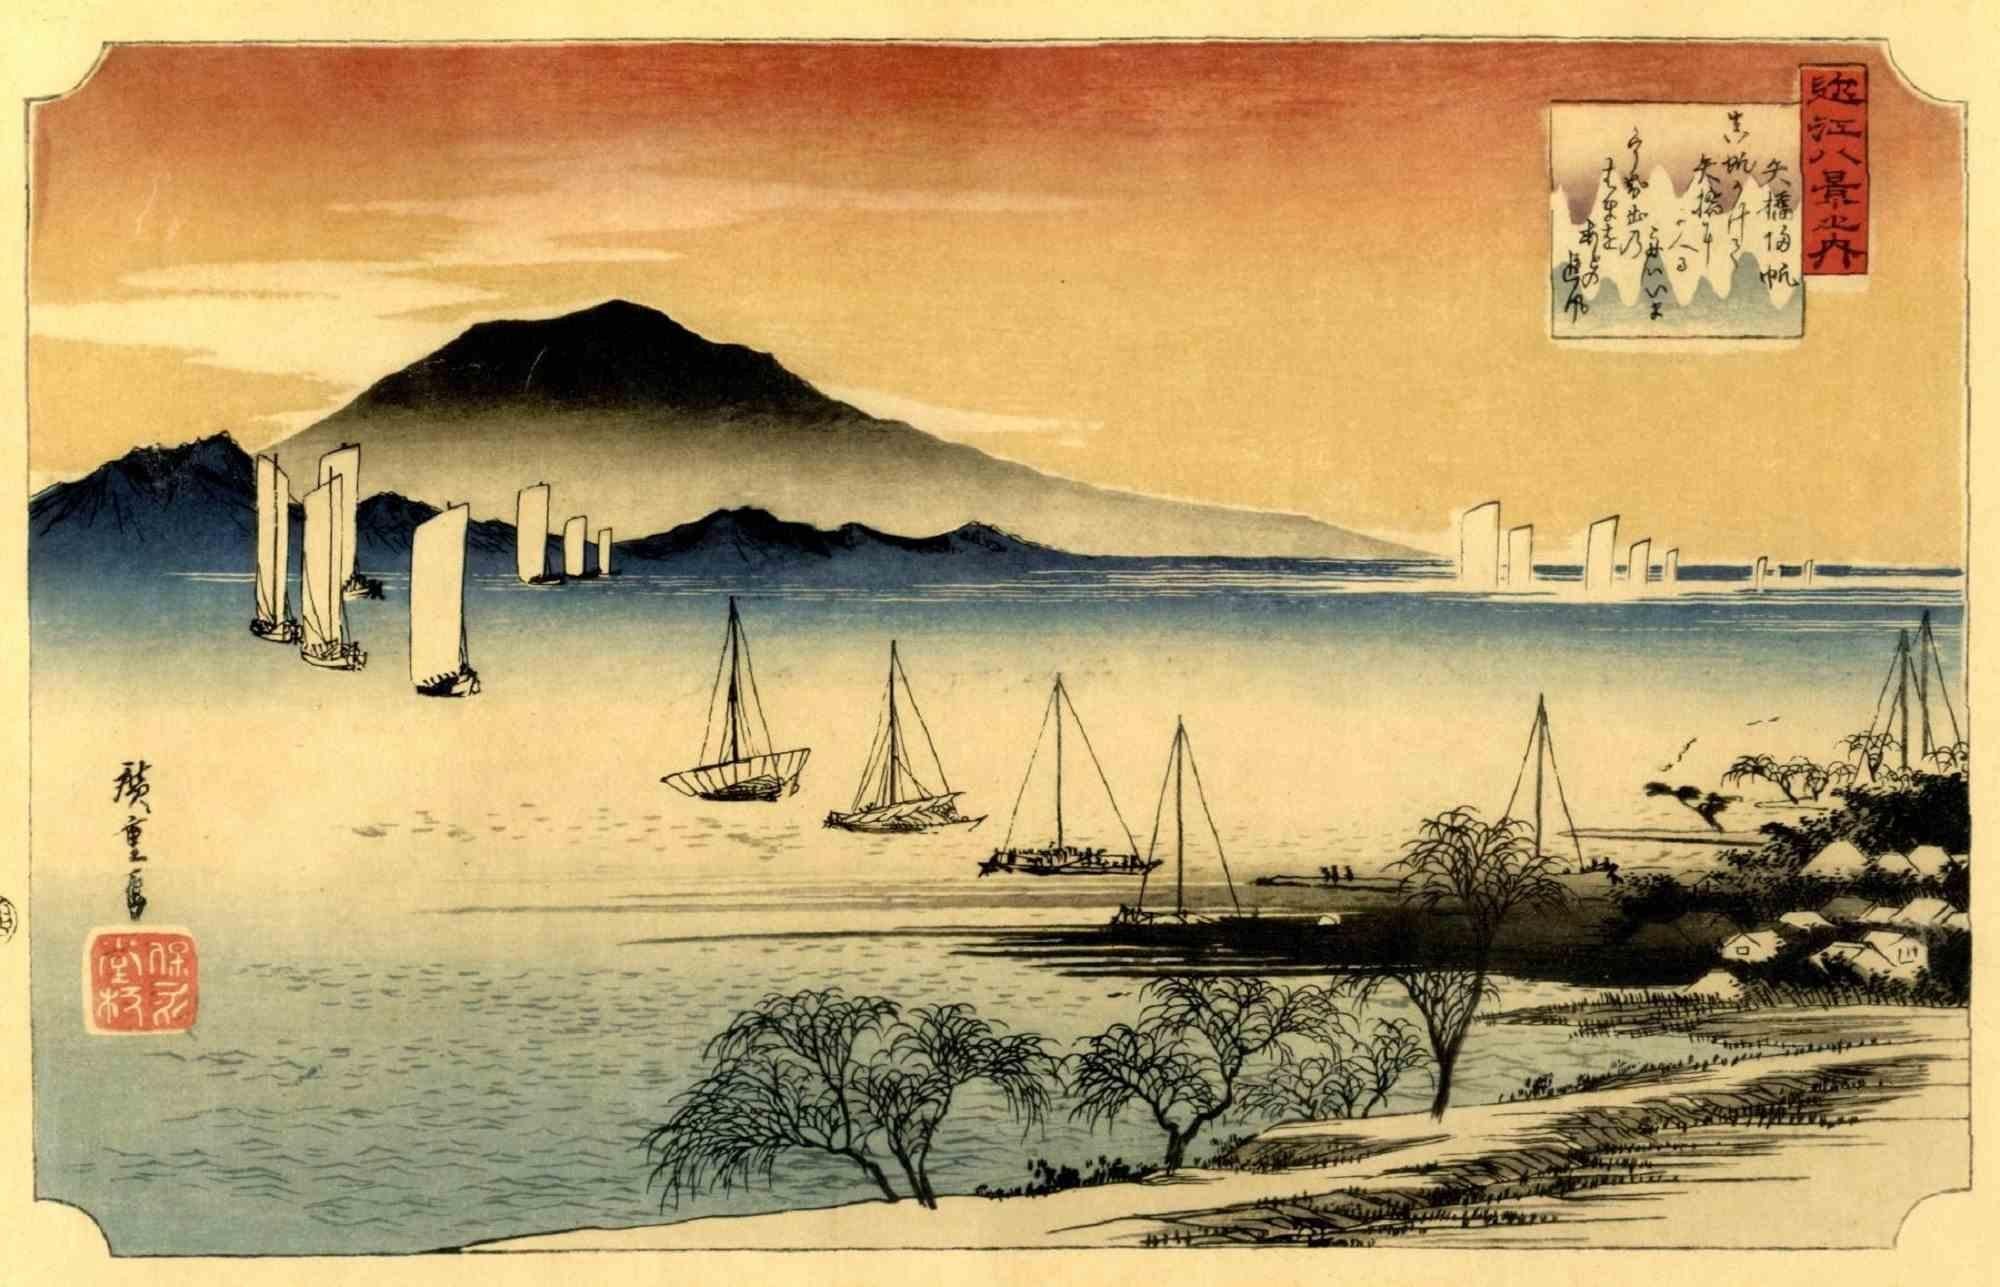 Lake Biwa, sunset in Yabase is an original modern artwork realized by Utagawa Hiroshige (1797 – 12 October 1858) in 1920s.

Woodcut Print Oban Yokoe Format.

Reprint of of the Taisho to early Showa Period (Early 20th Century). From the famous series